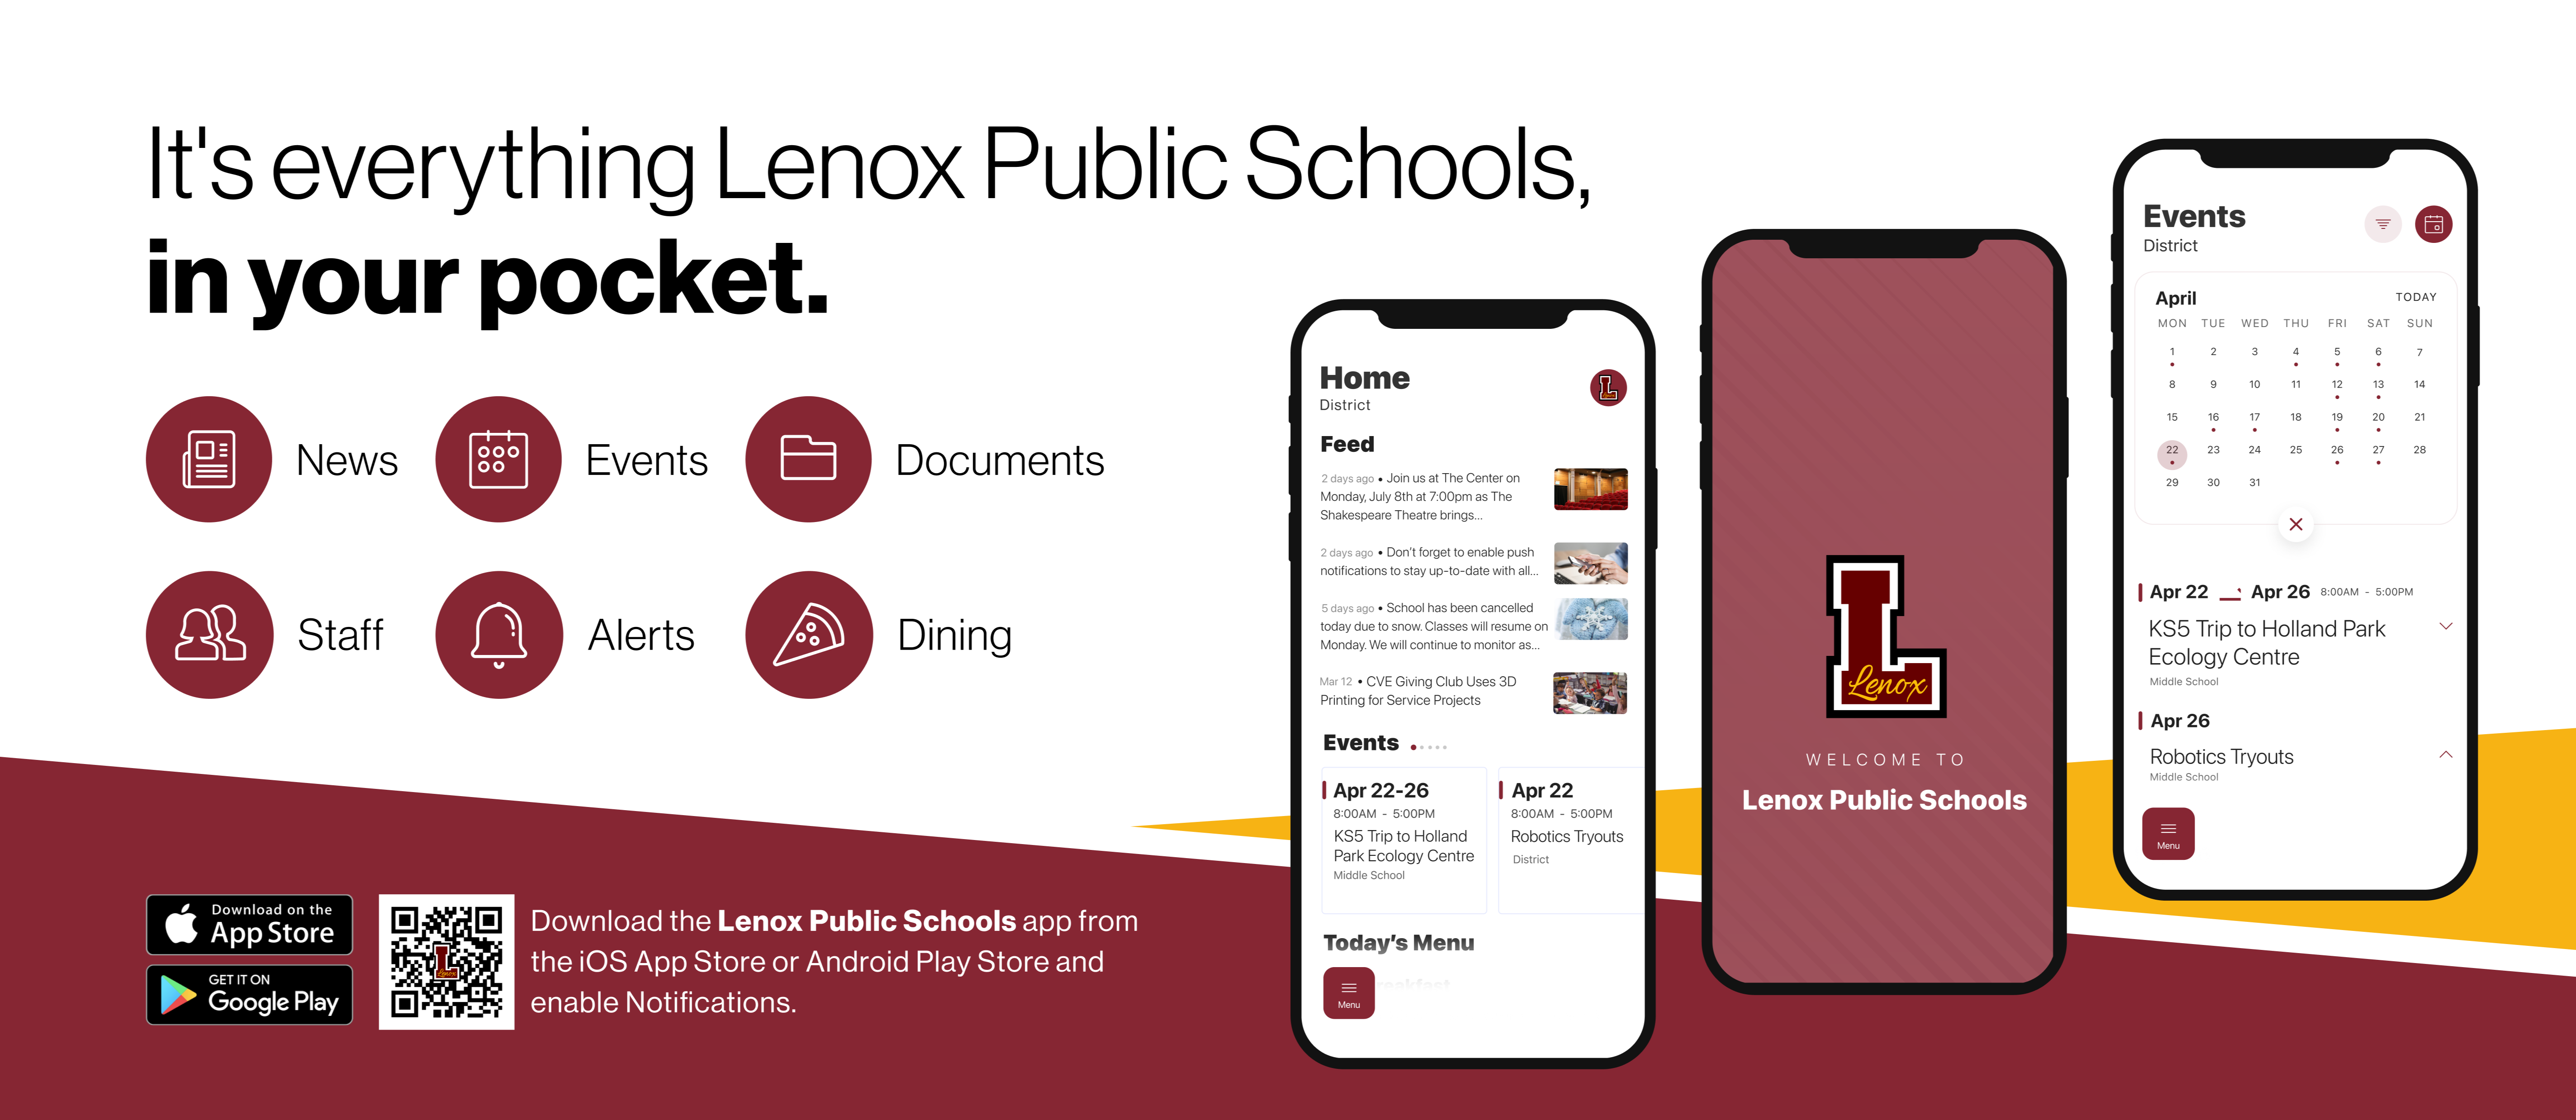 It’s everything Lenox Public Schools, in your pocket.